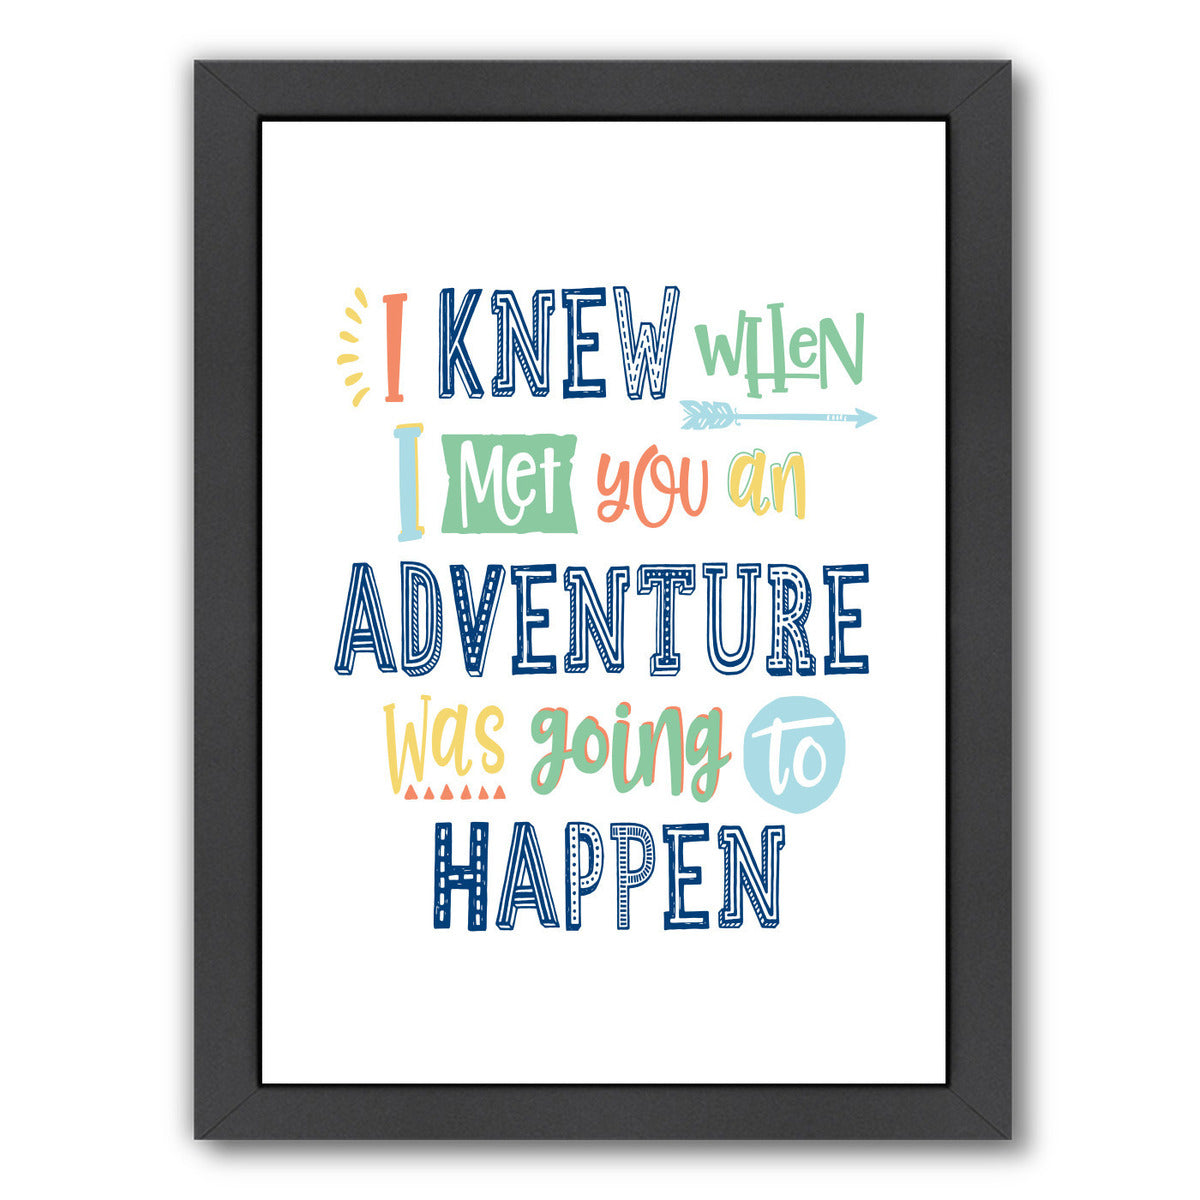 I Knew When I Met You An Adventure Was Going To Happen By Elena David - Black Framed Print - Wall Art - Americanflat